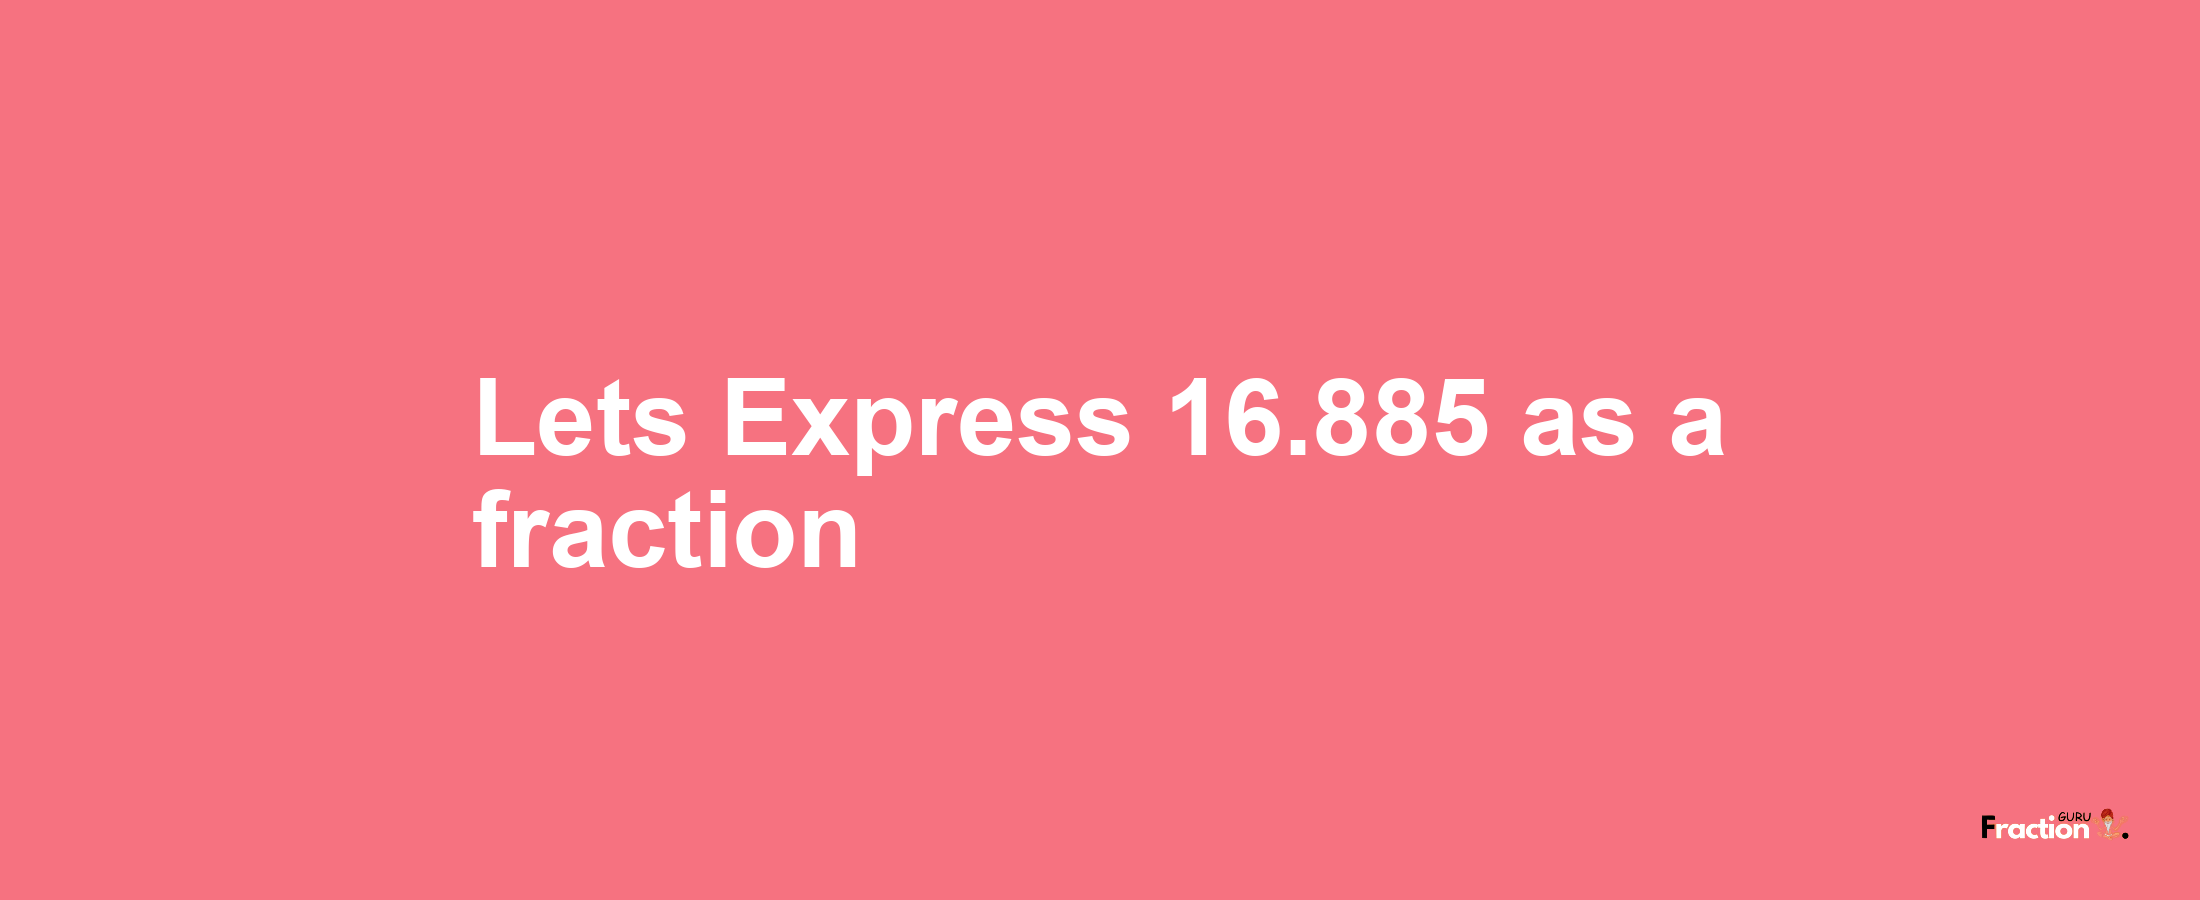 Lets Express 16.885 as afraction